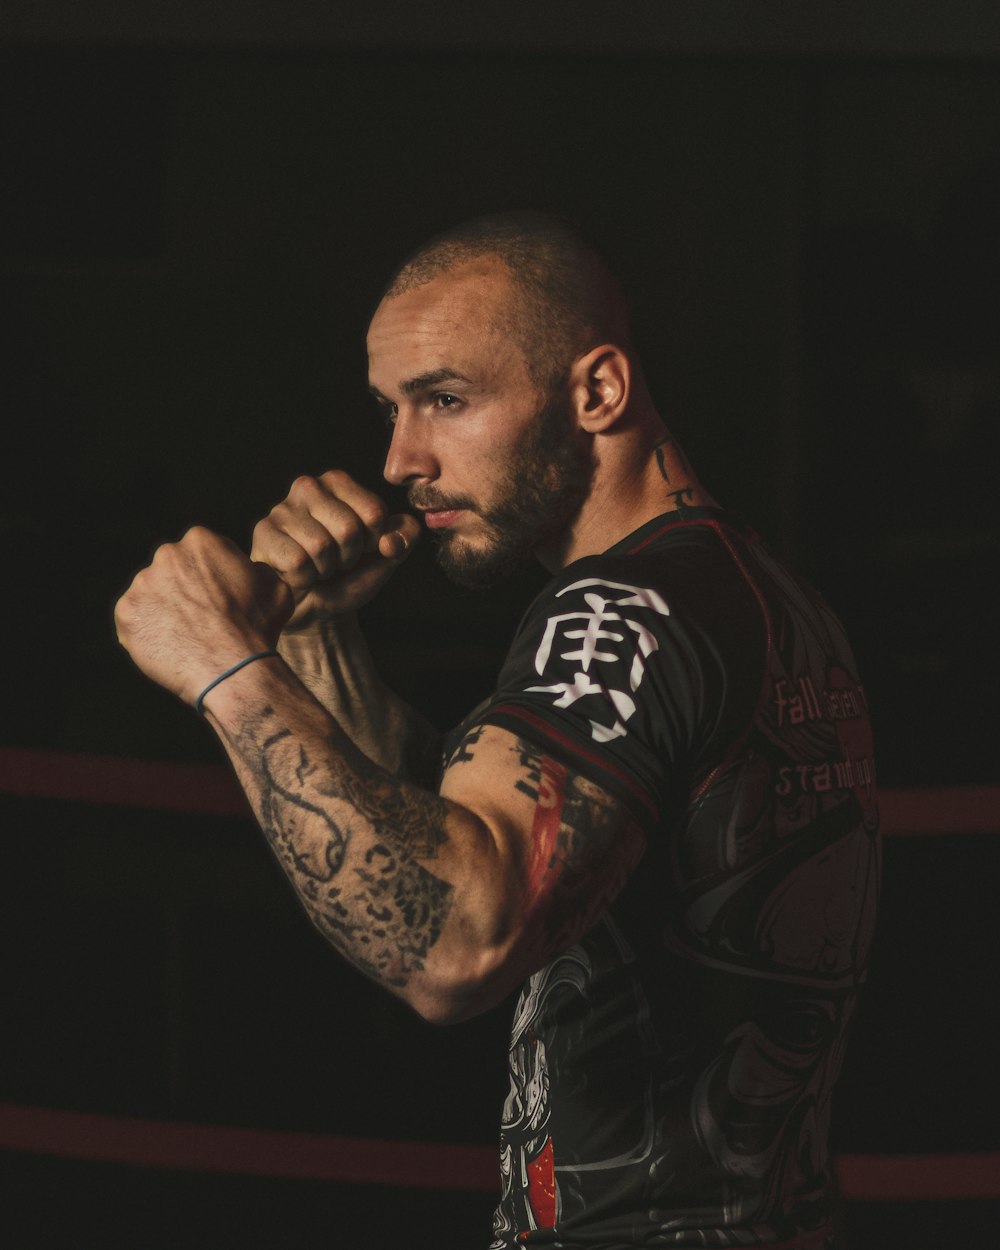 a man with a tattoo on his arm standing in a ring